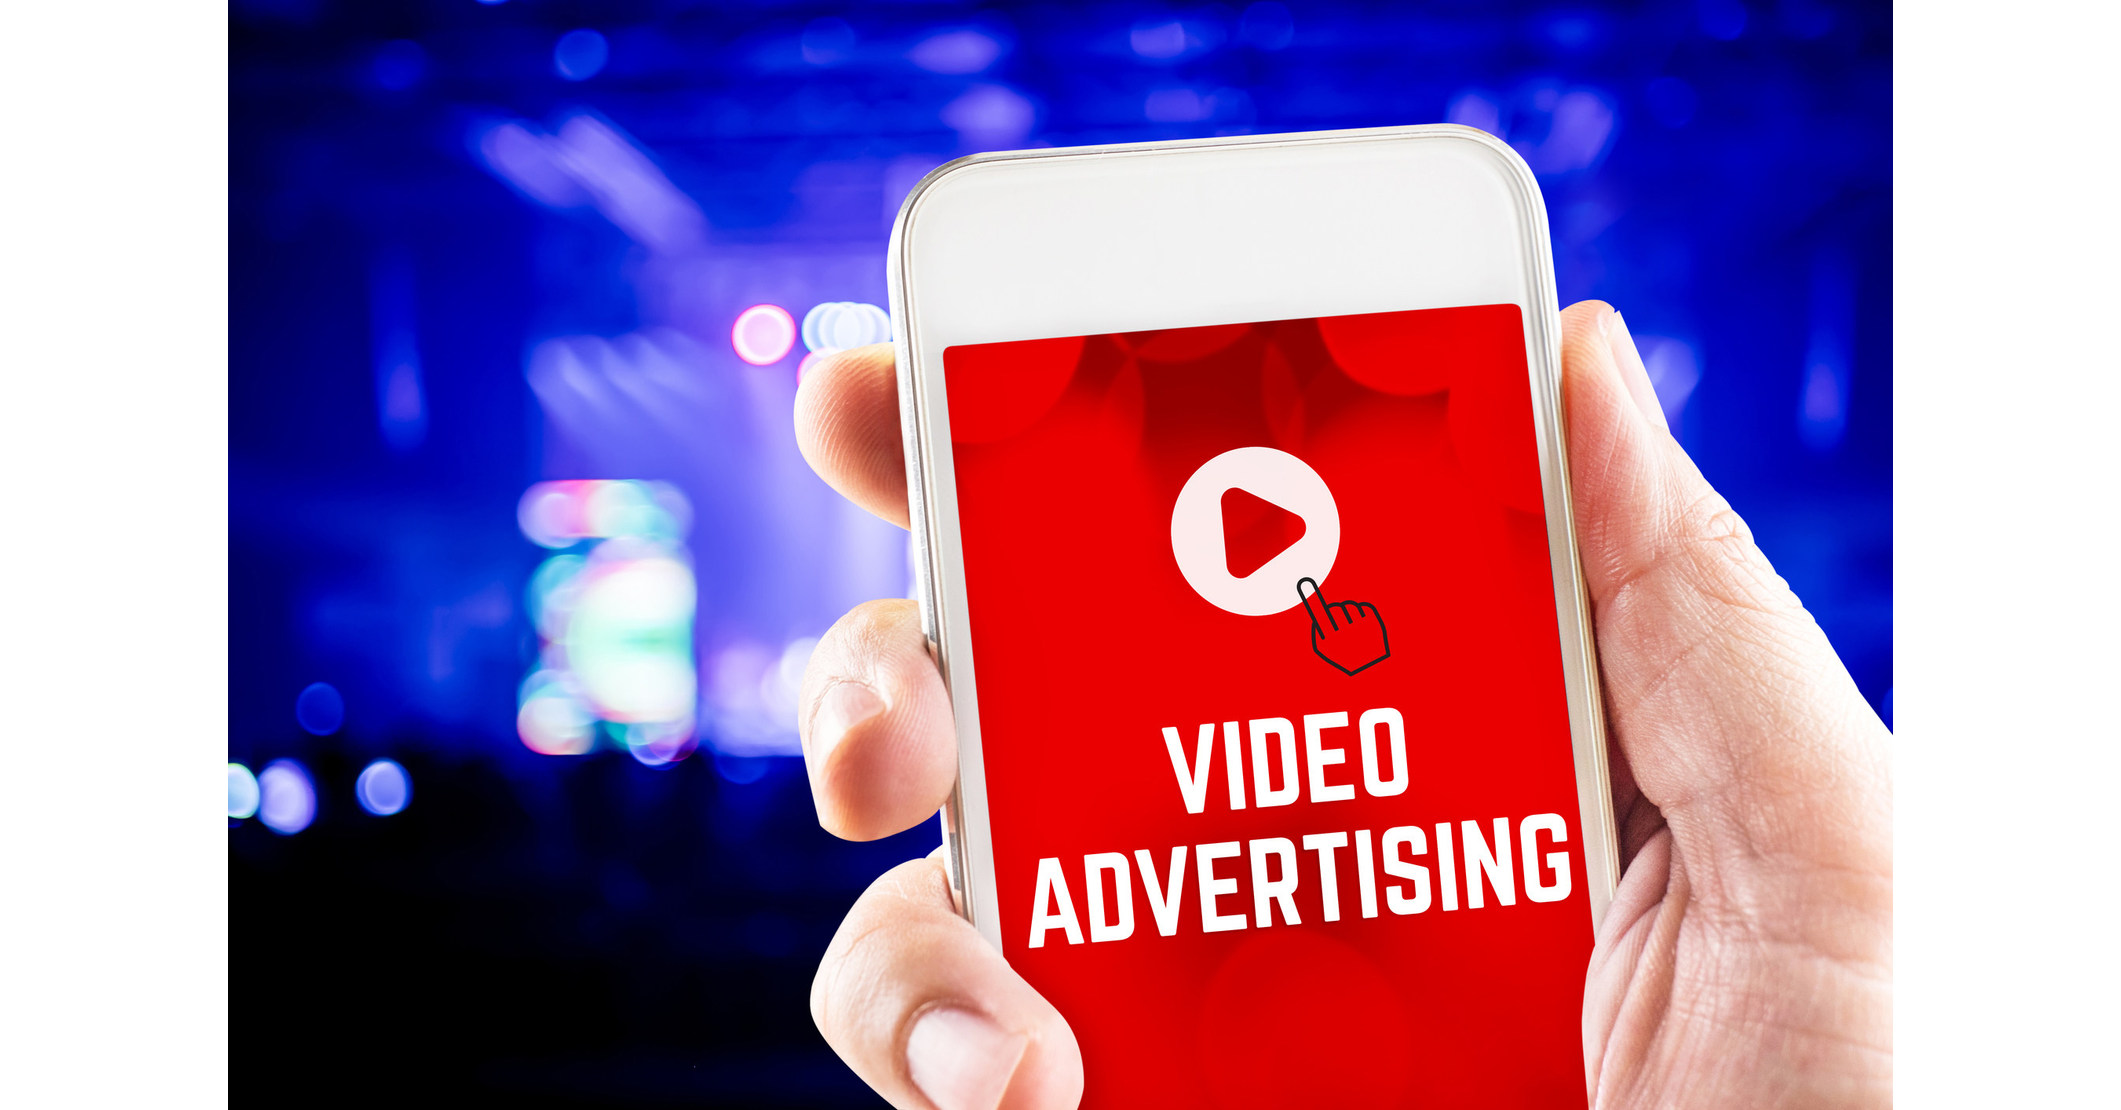 Mobile channel. Mobile Video advertising. Video advertising. Video ads.